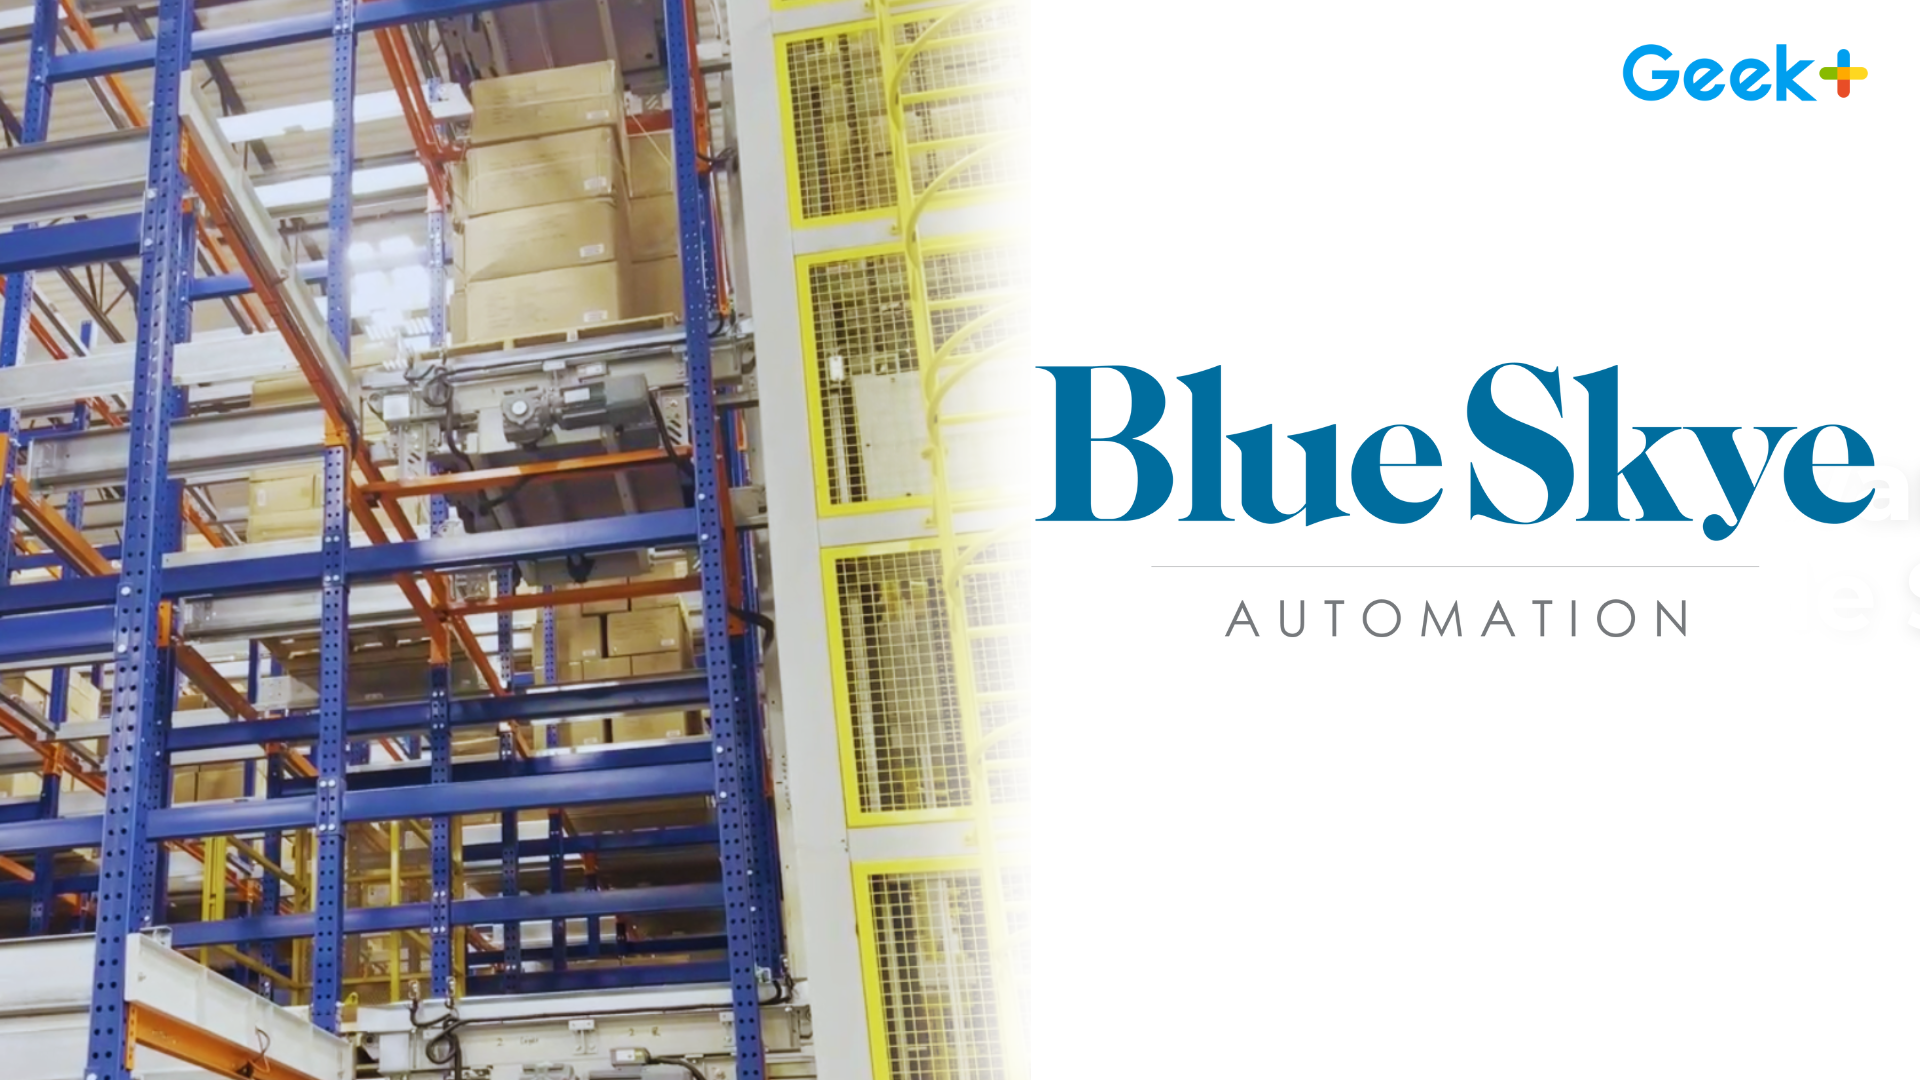 Geek+ partners with BlueSkye Automation to bring customers complete smart warehouse solutions